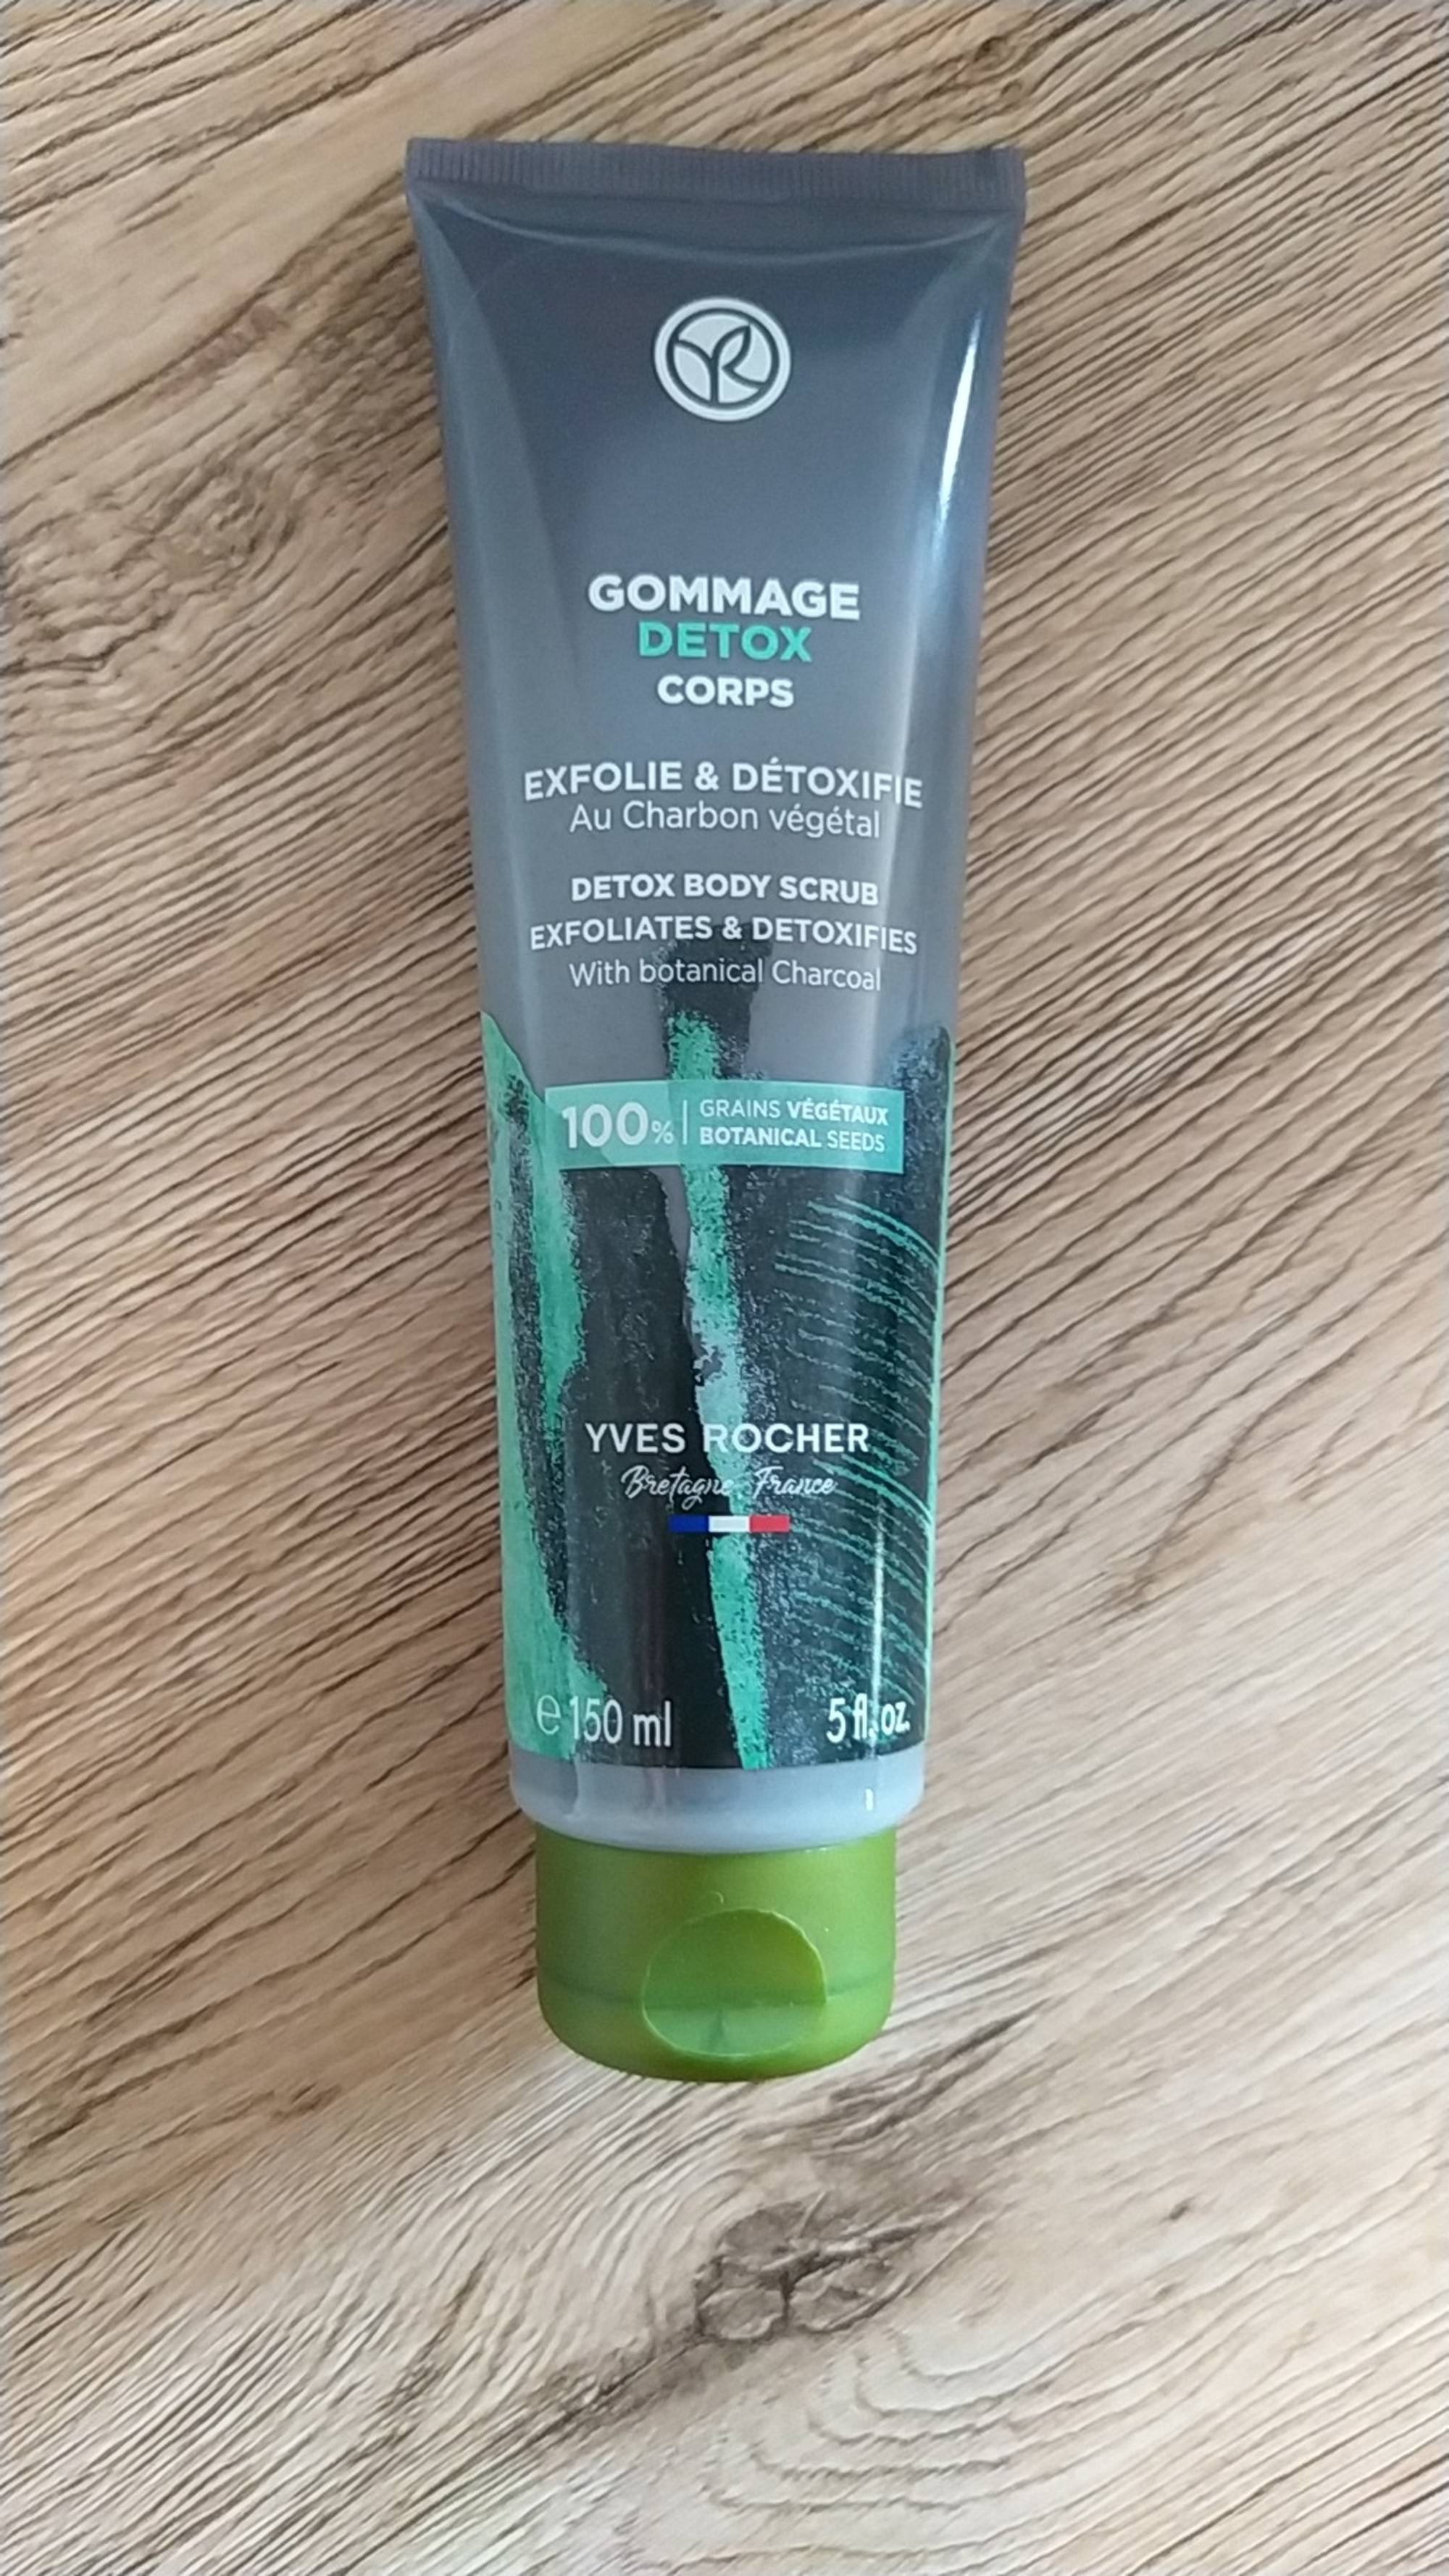 YVES ROCHER - Gommage detox corps